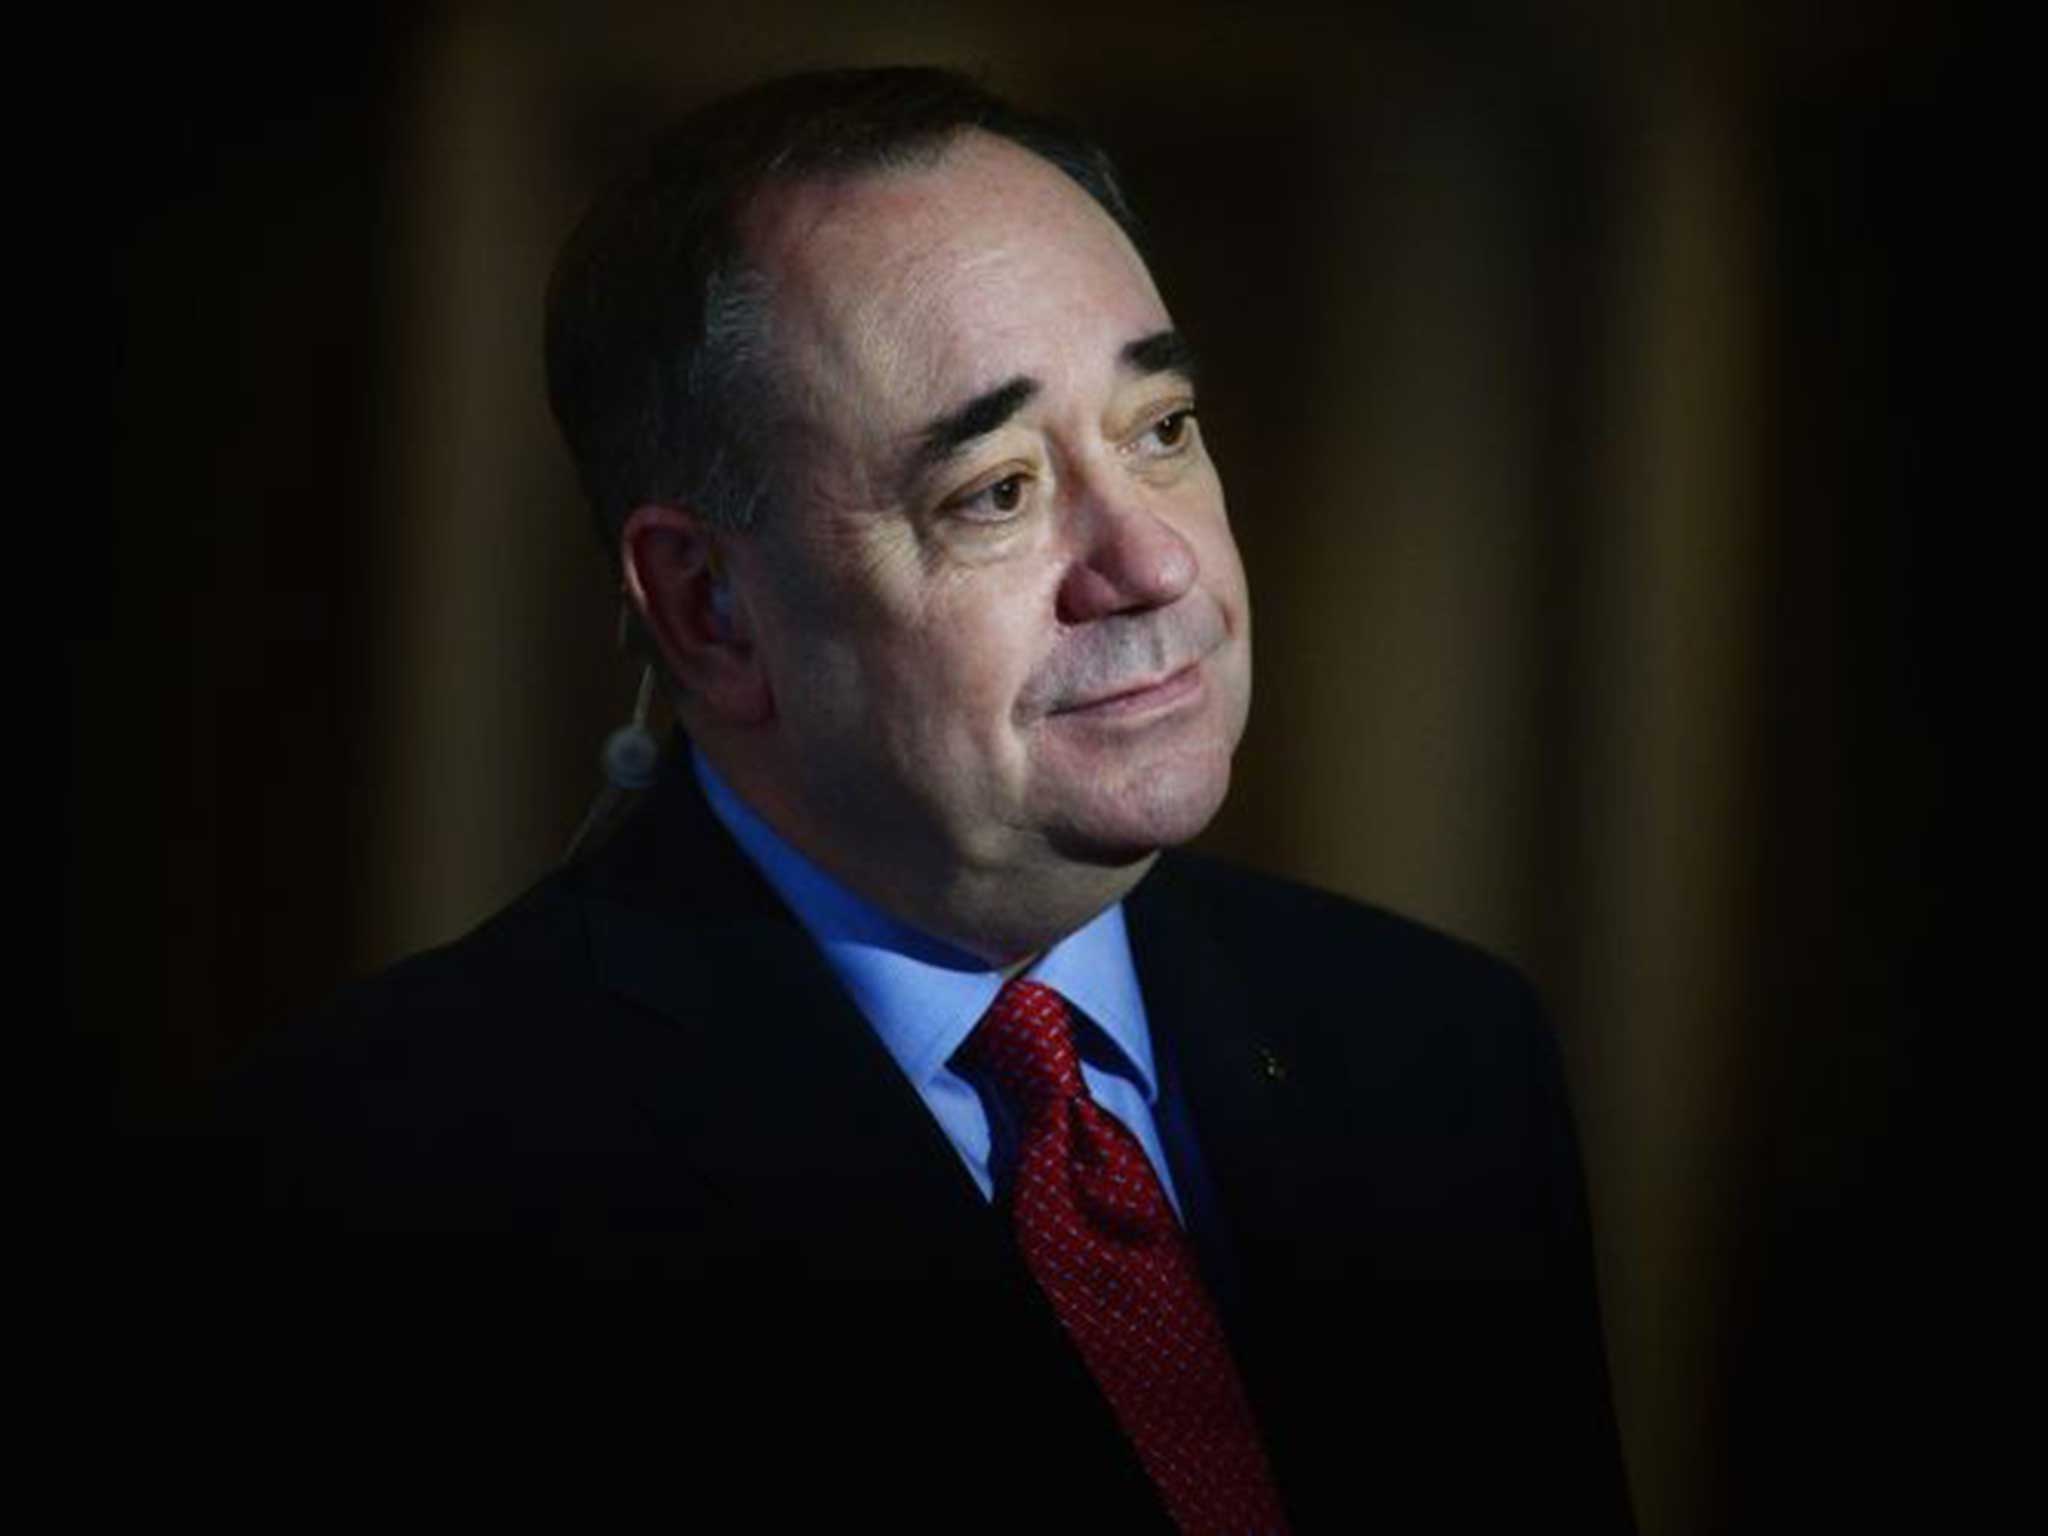 The Tories are keen to place Miliband alongside Alex Salmond